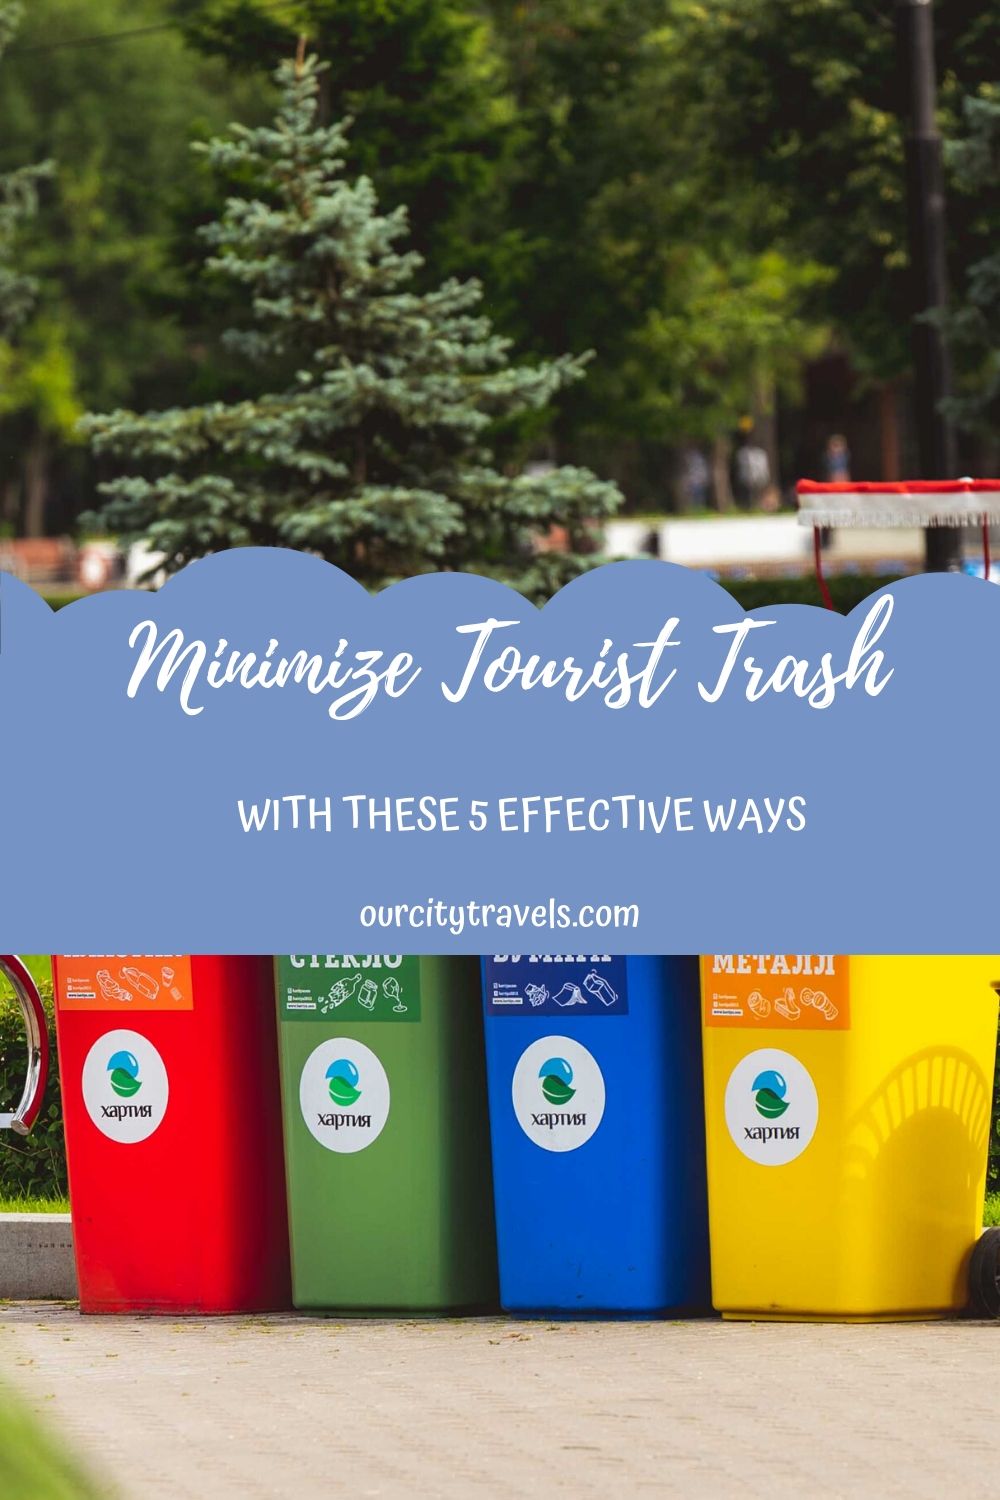 Sustainable tourism scopes a wide concept, being a responsible tourist may sound just a little part of it but it surely will benefit a lot.  So here are 5 ways to minimize tourist trash.